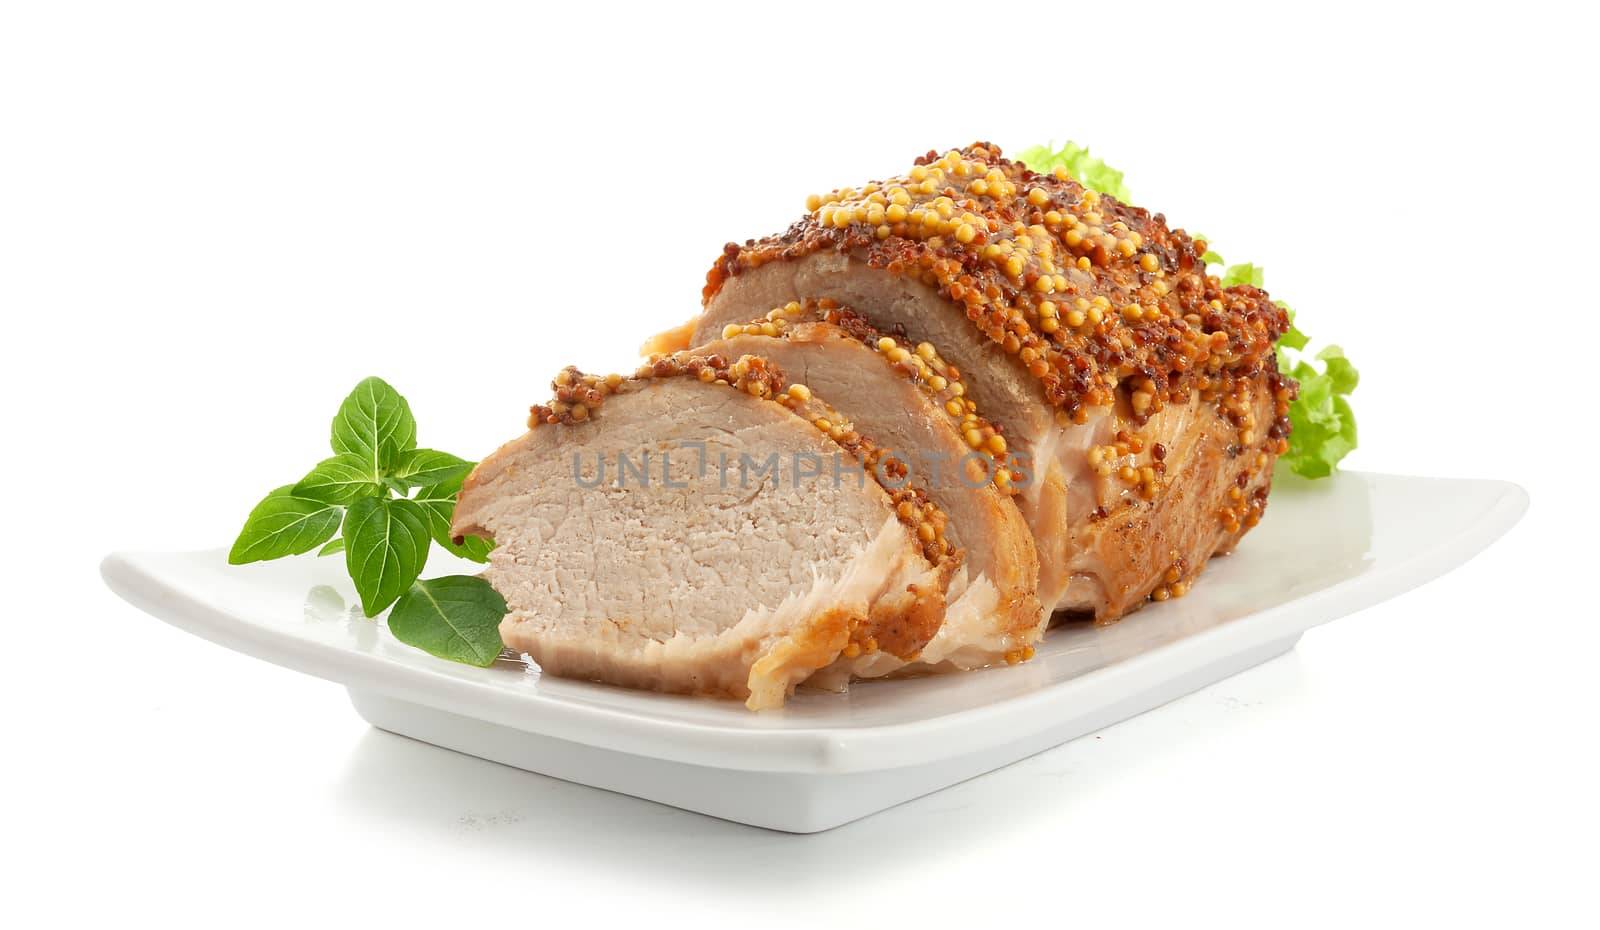 Baked pork with french mustard, basil and lettuce on the white plate